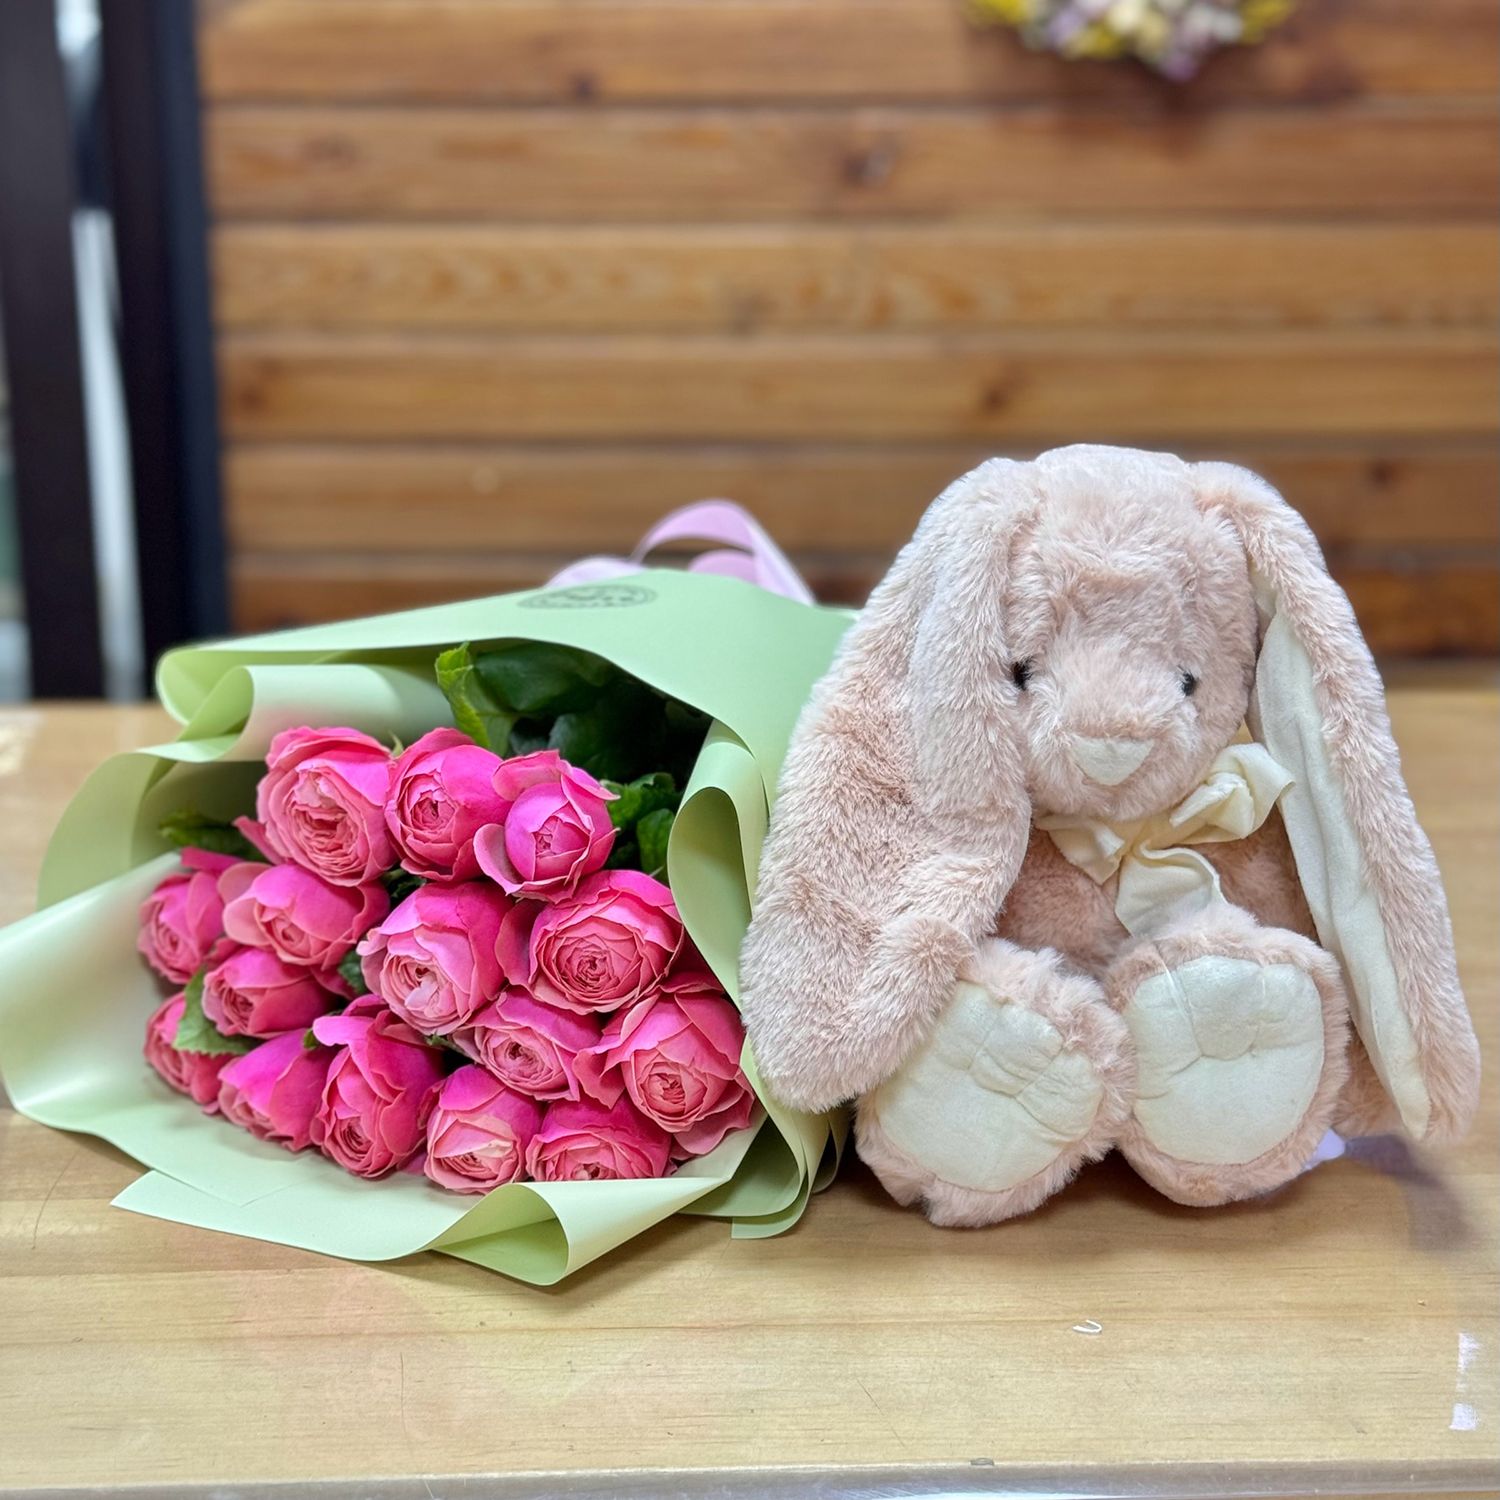 Pink roses and a bunny